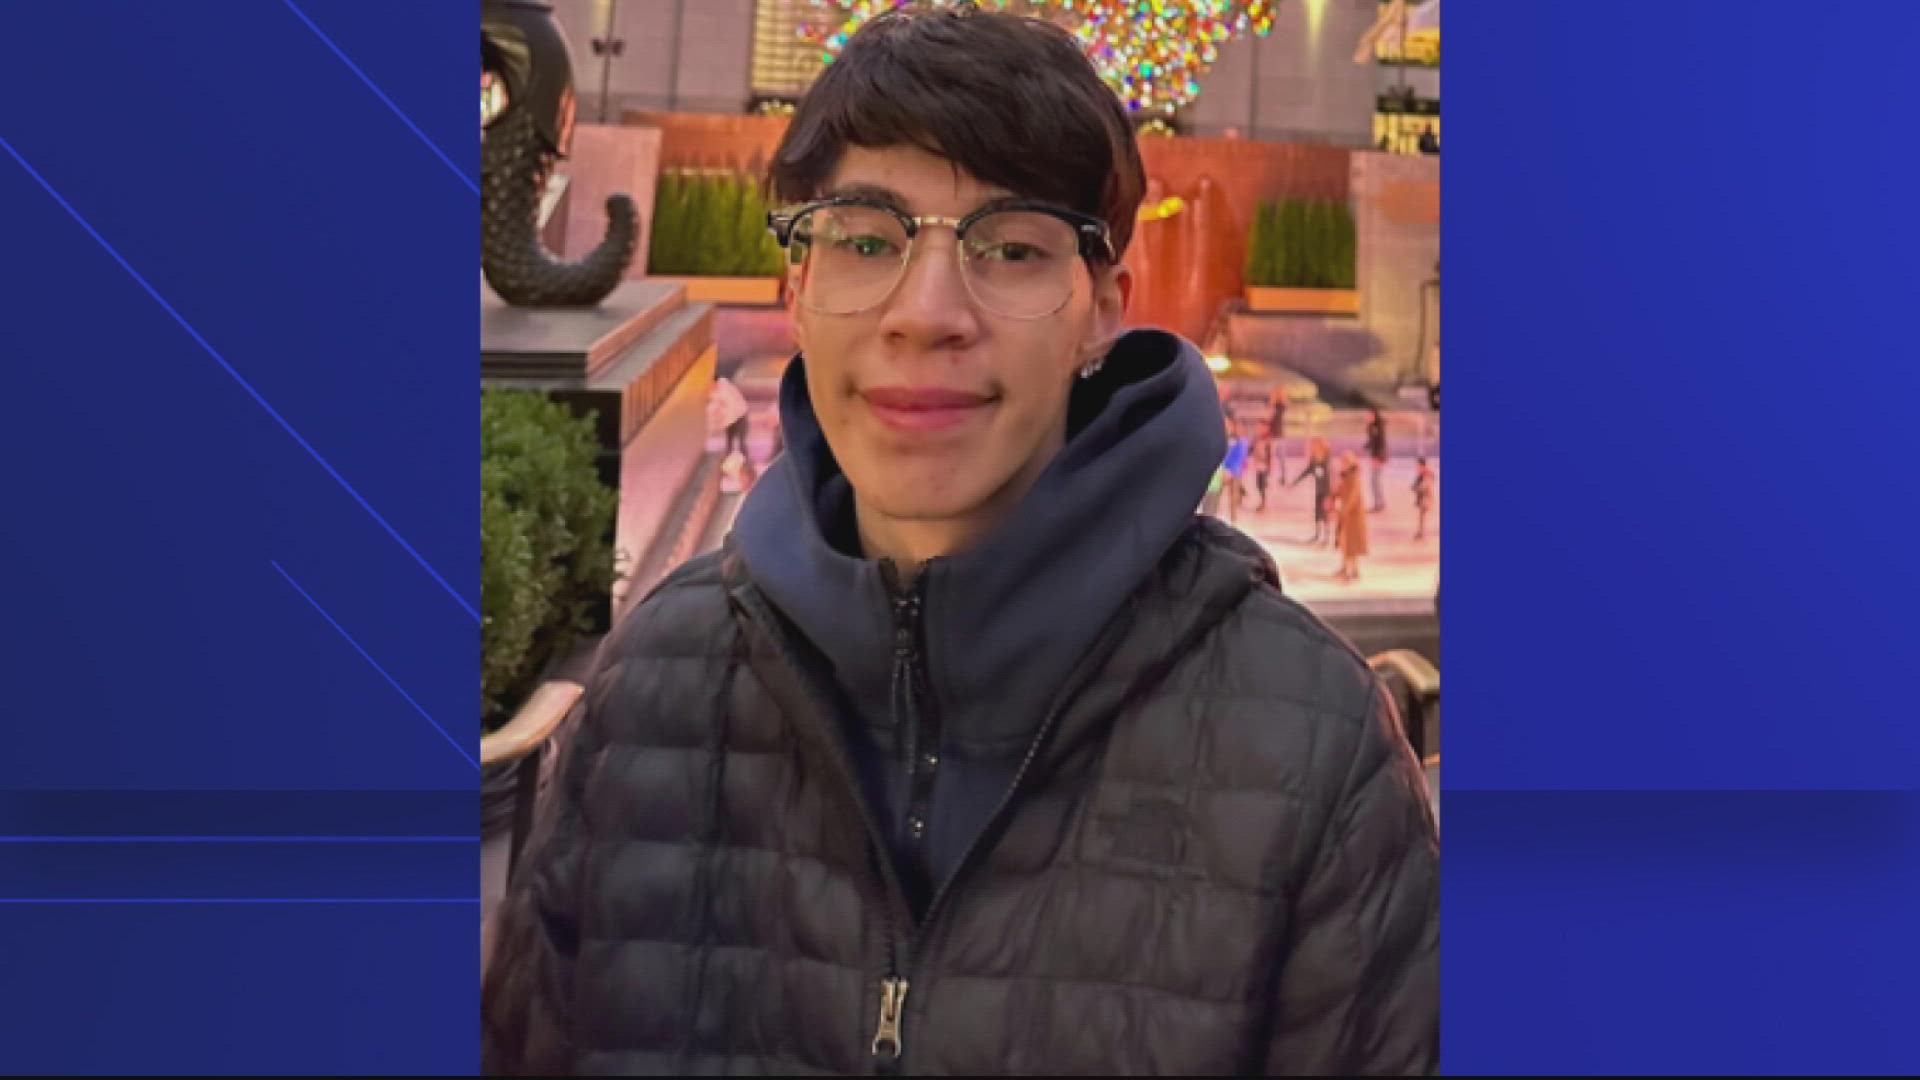 Guerrero is described as 5 feet, 10 inches, weighs 109 pounds with both brown eyes and hair. He was last seen wearing a blue sweater, blue jeans, and black.